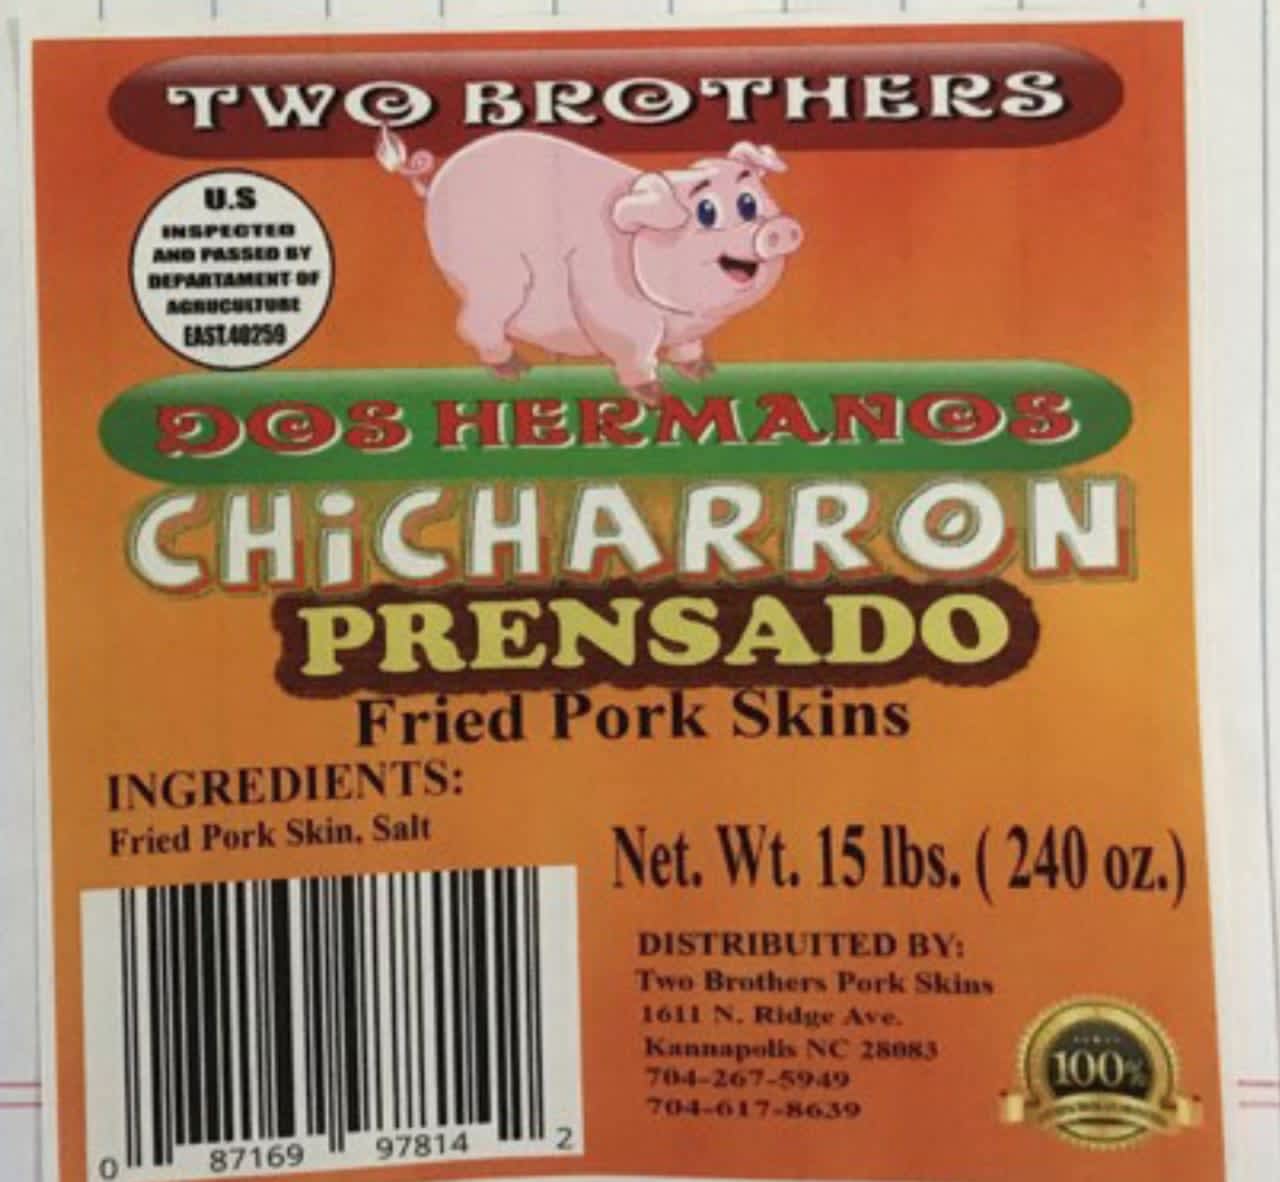 The USDA has recalled a popular pork skin product.